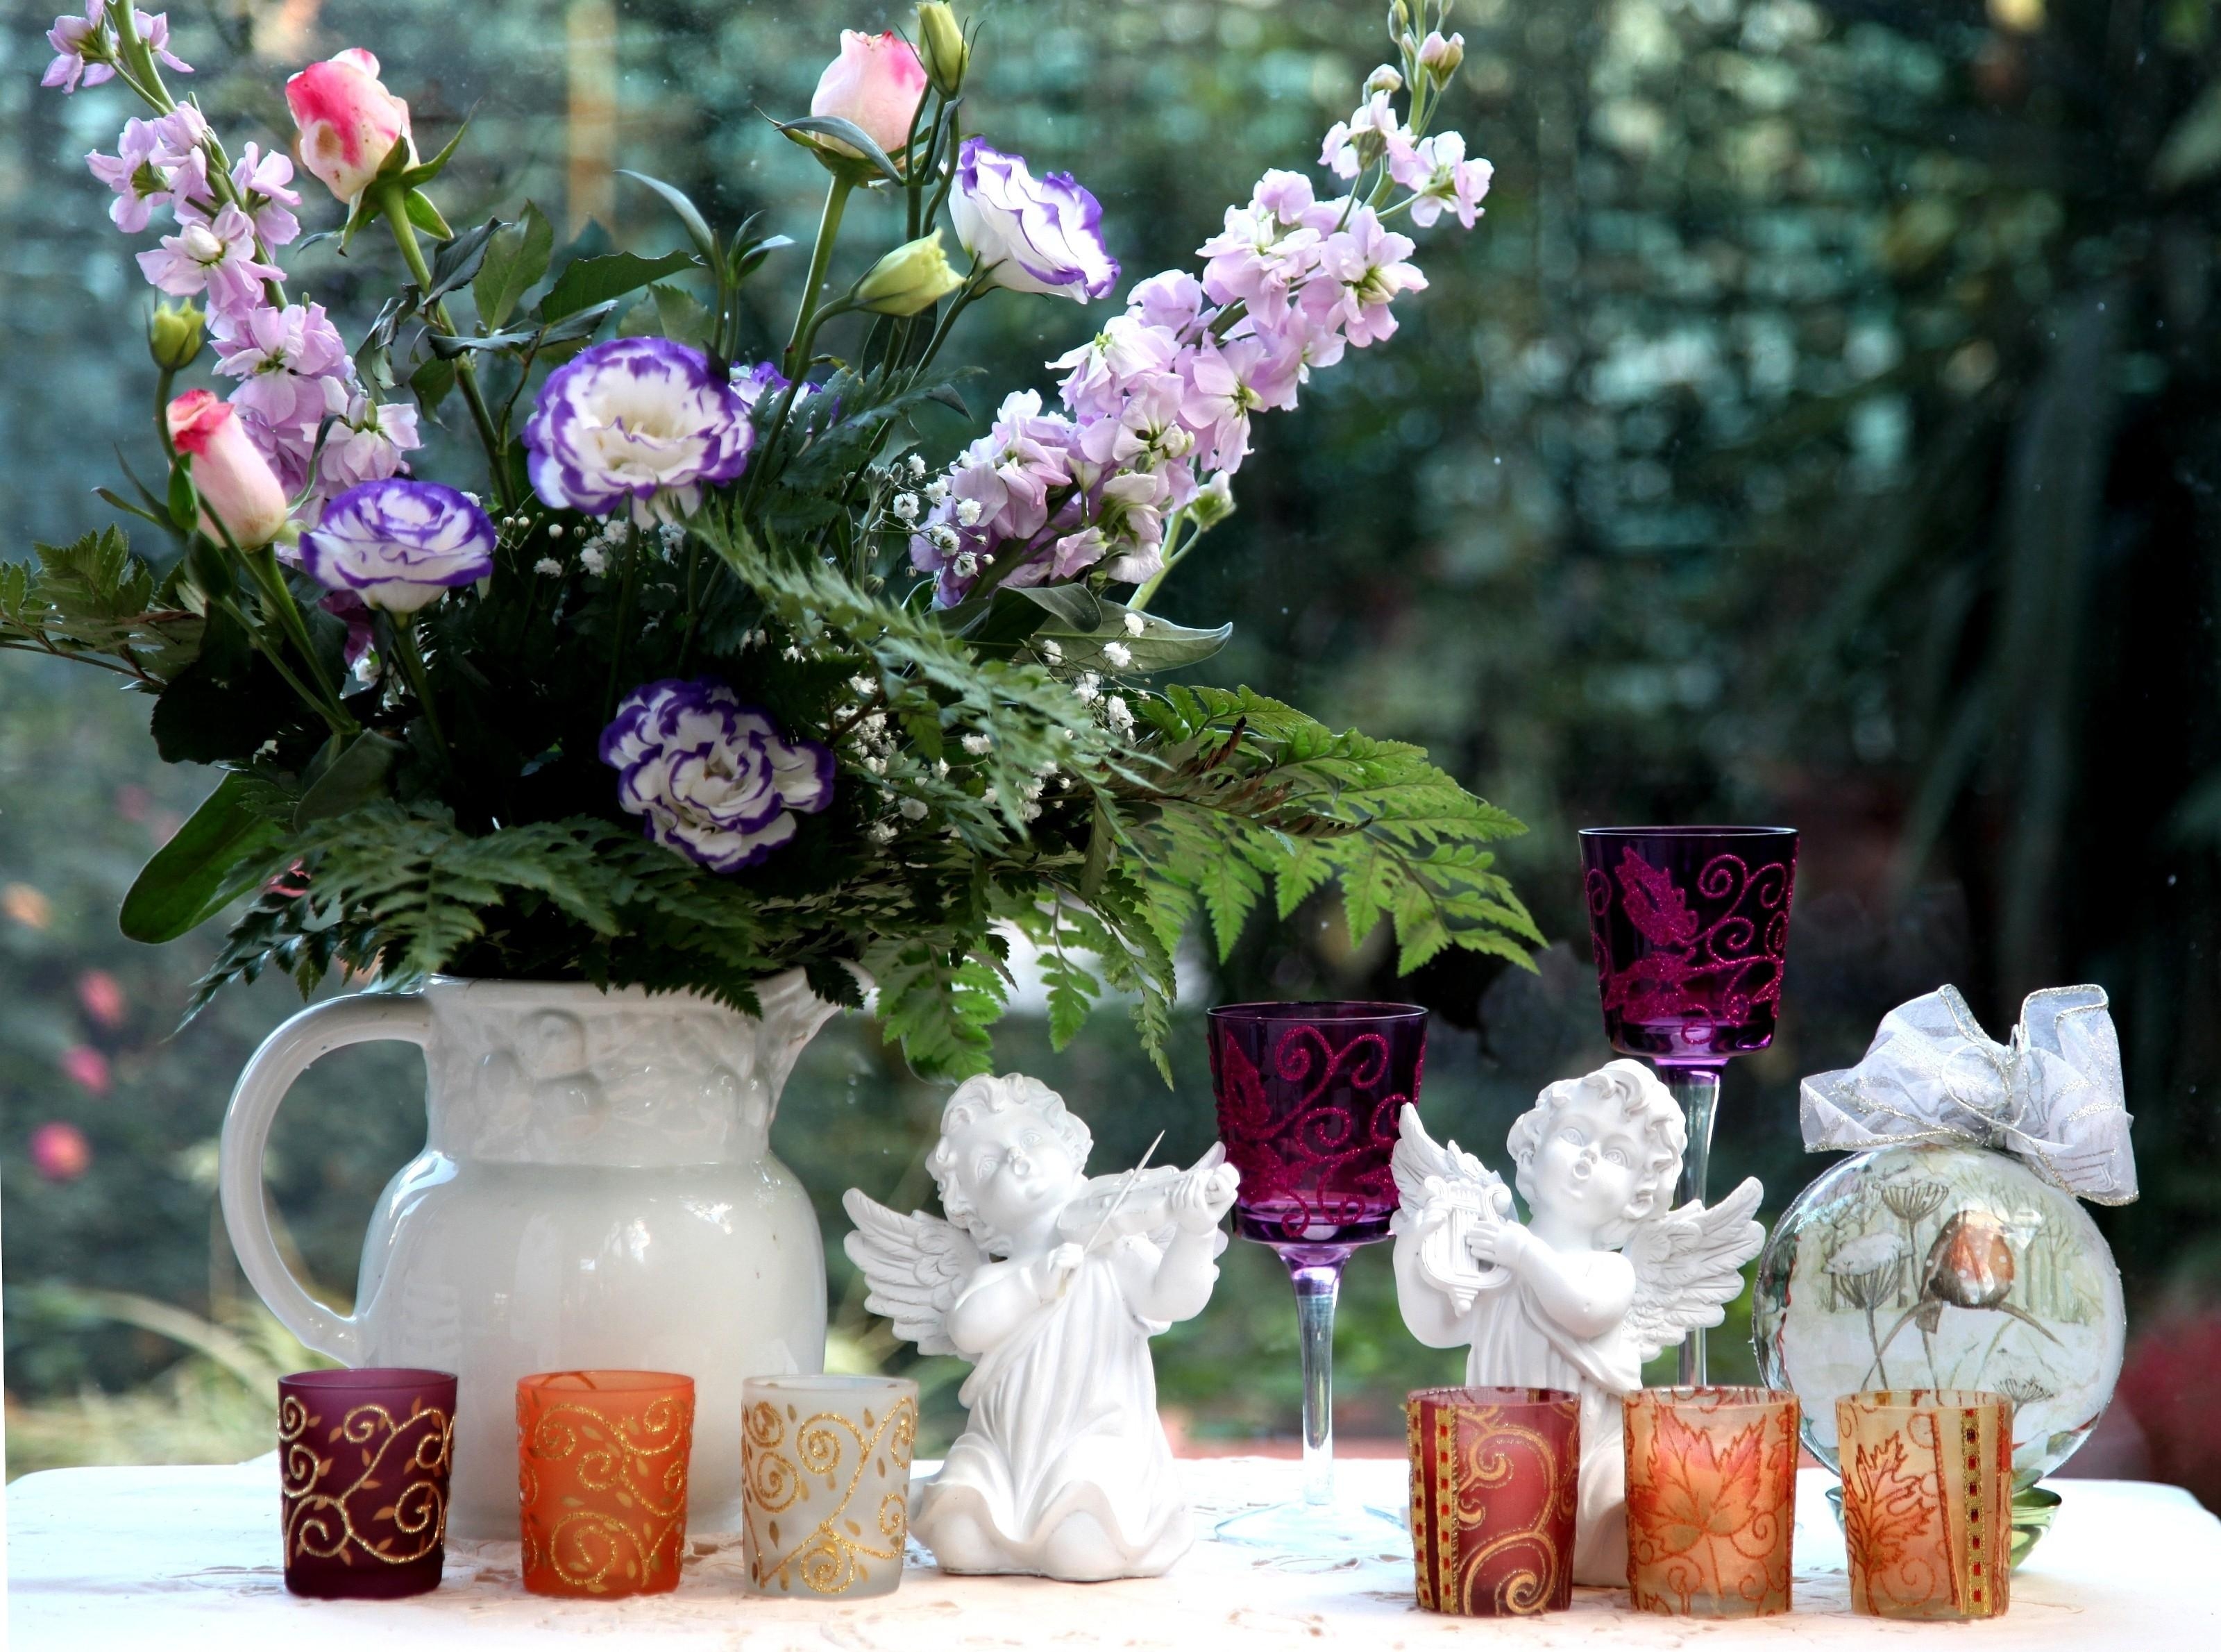 angels, flowers, bouquet, jug, glasses, lisianthus russell, lisiantus russell, levkoy, gillyflower, goblets